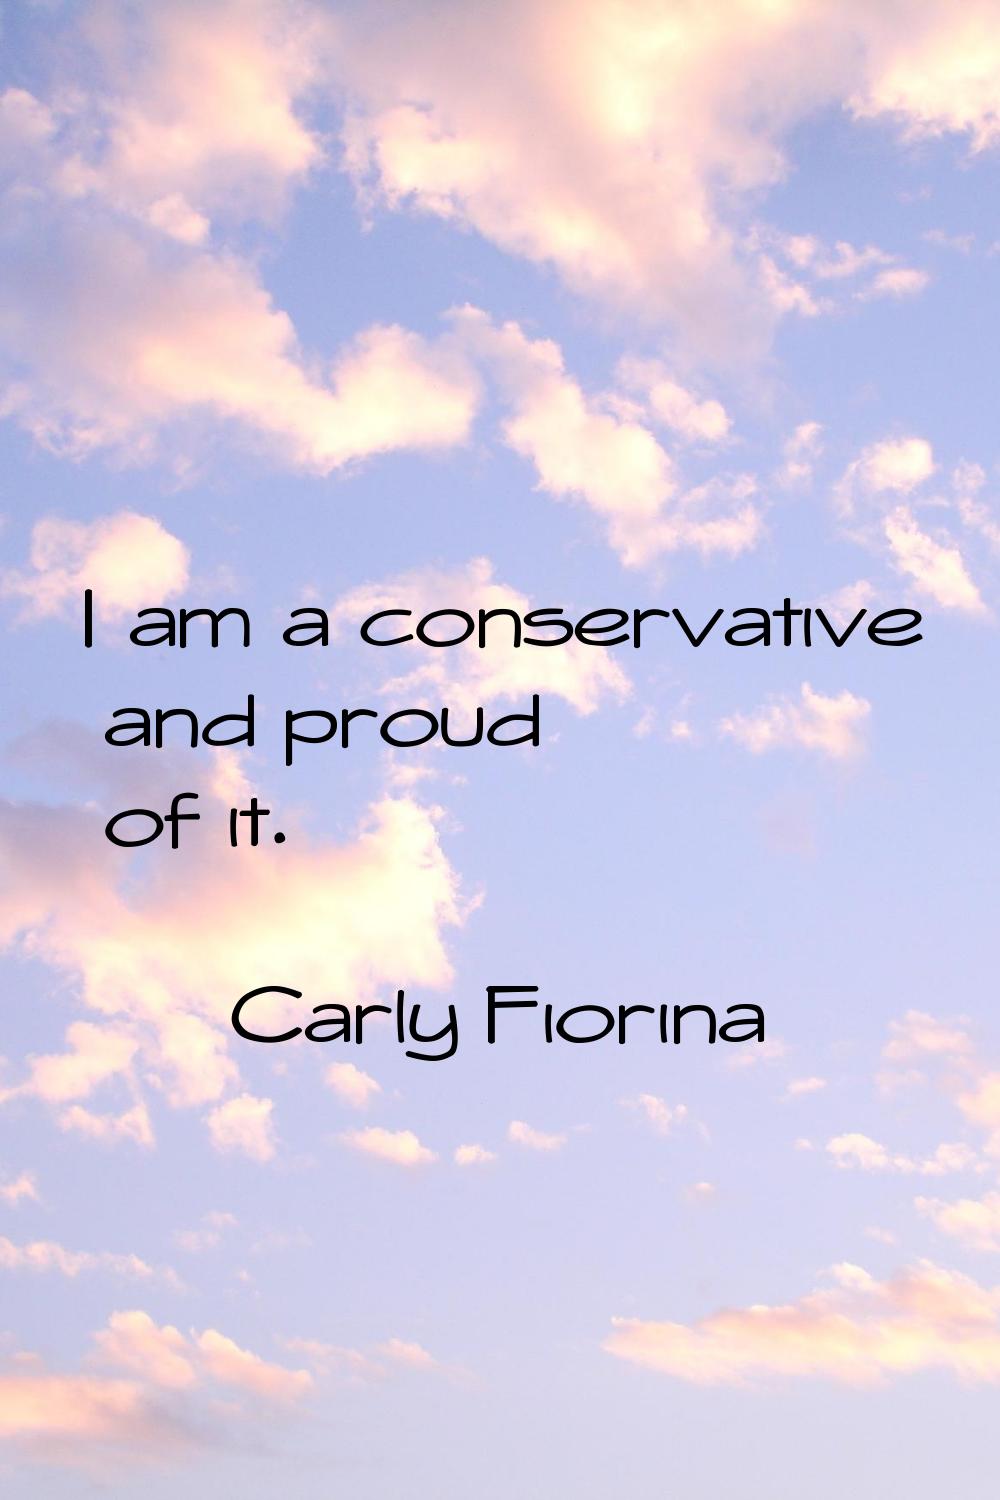 I am a conservative and proud of it.